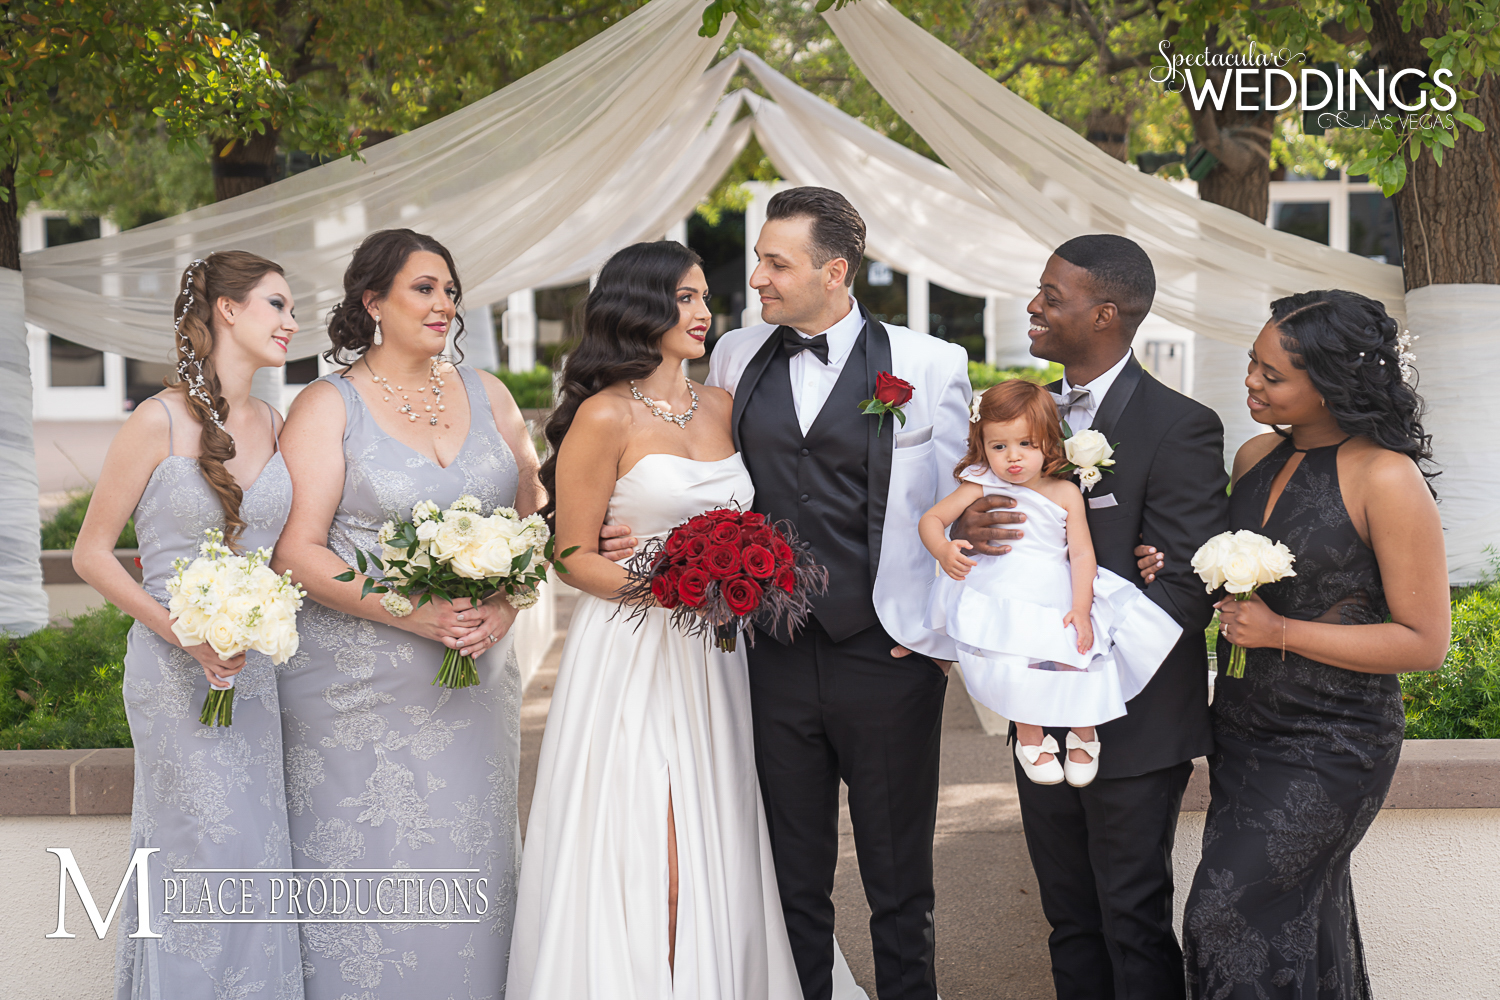 Happy couple stand surrounded by bridesmaids in black and silver and groomsman holding a cute flower girl at Emerald at Queensridge wedding venue in Las Vegas